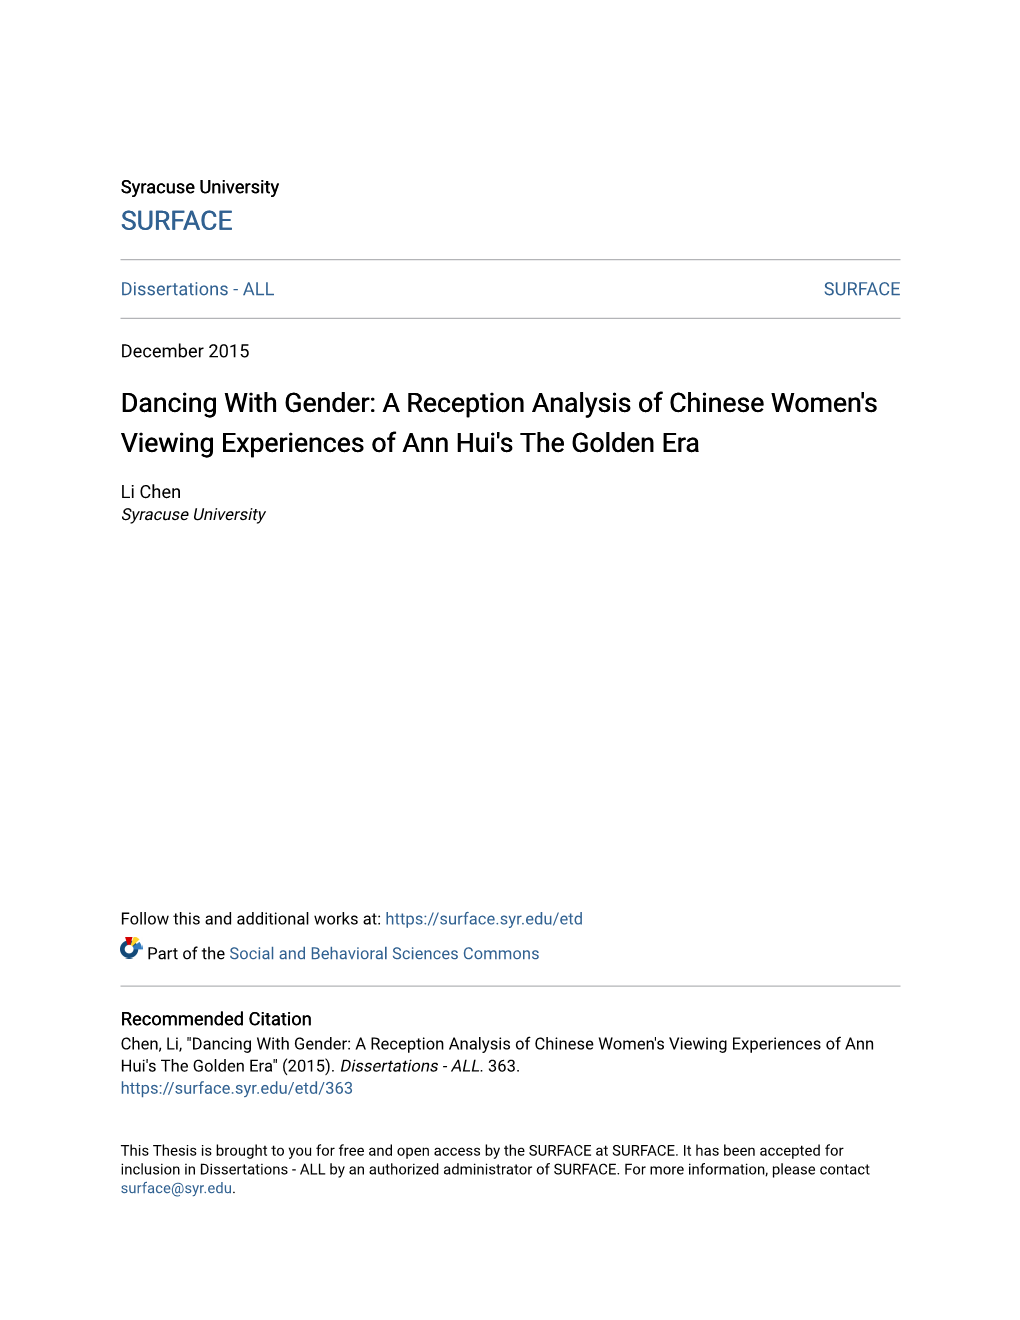 A Reception Analysis of Chinese Women's Viewing Experiences of Ann Hui's the Golden Era